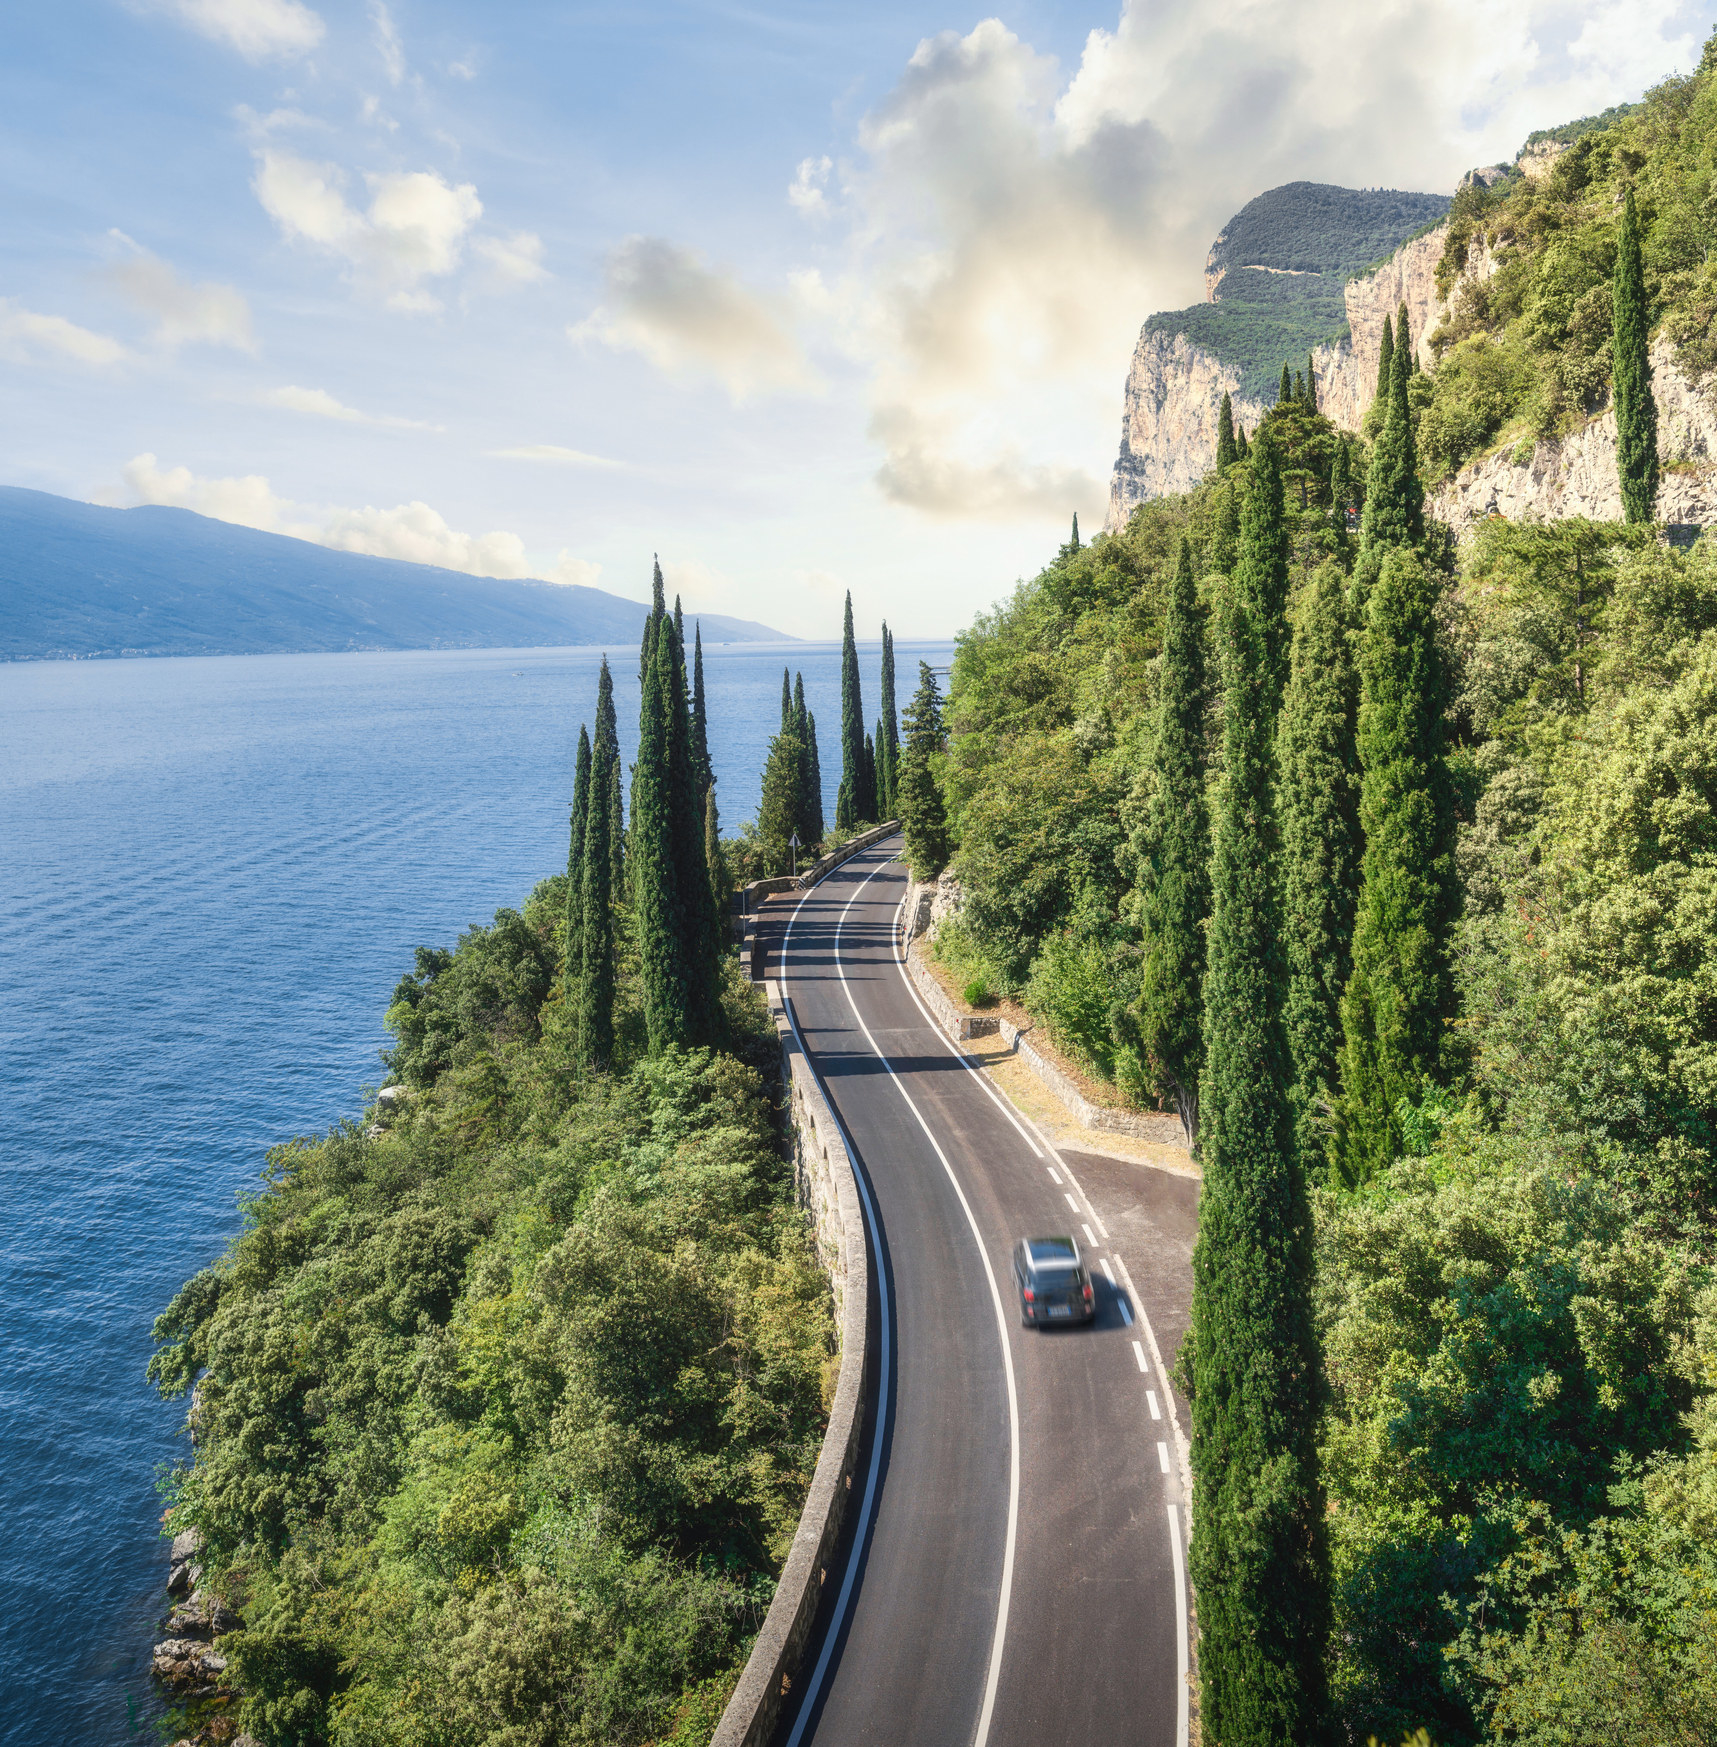 A car driving on a scenic road on Lake Garda.